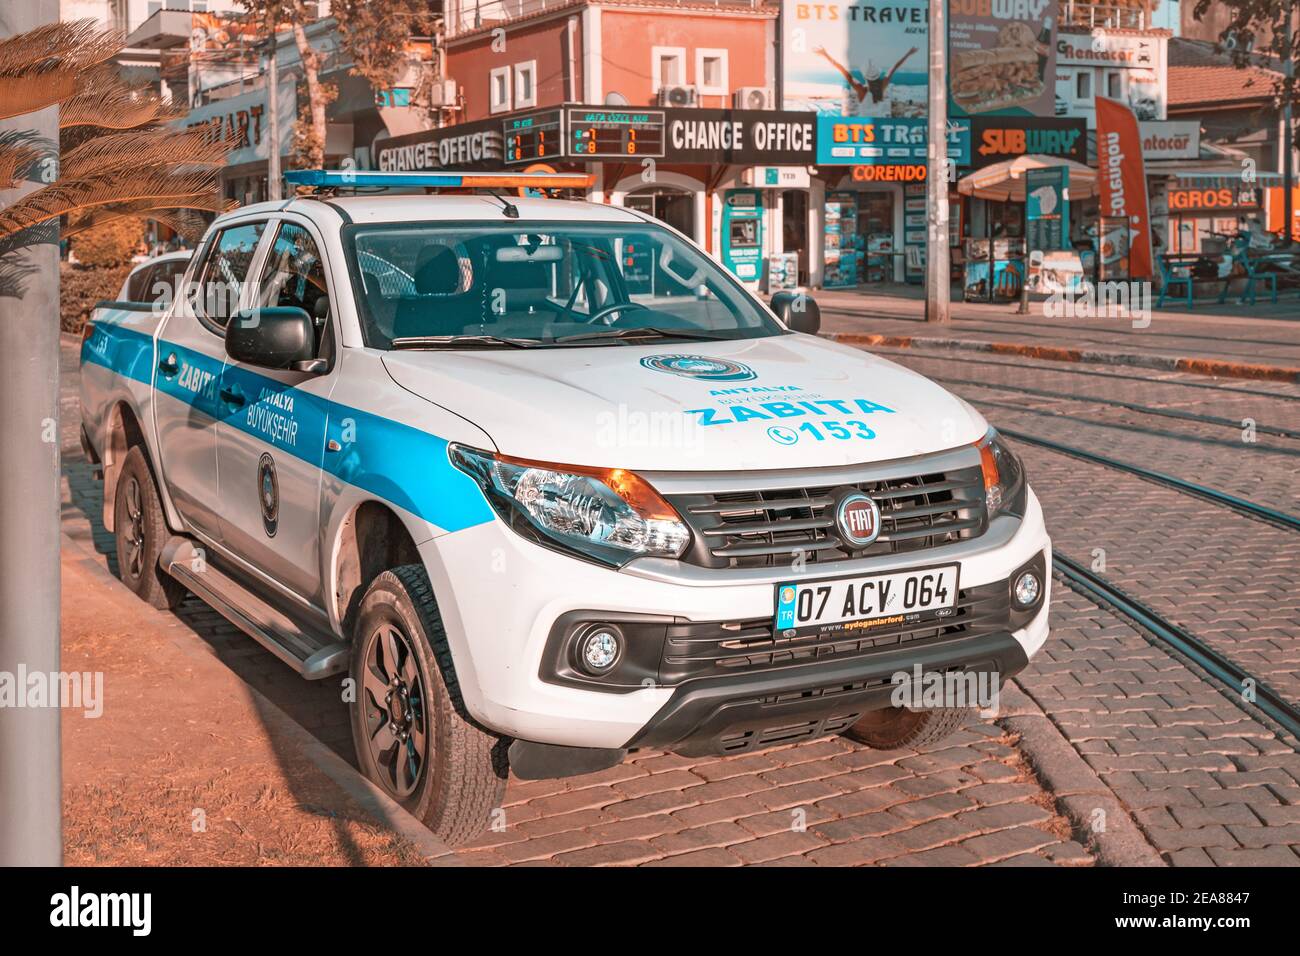 03 September 2020, Antalya, Turkey: A police car is parked in the center of Antalya city and patrolling and keeping order on the streets Stock Photo